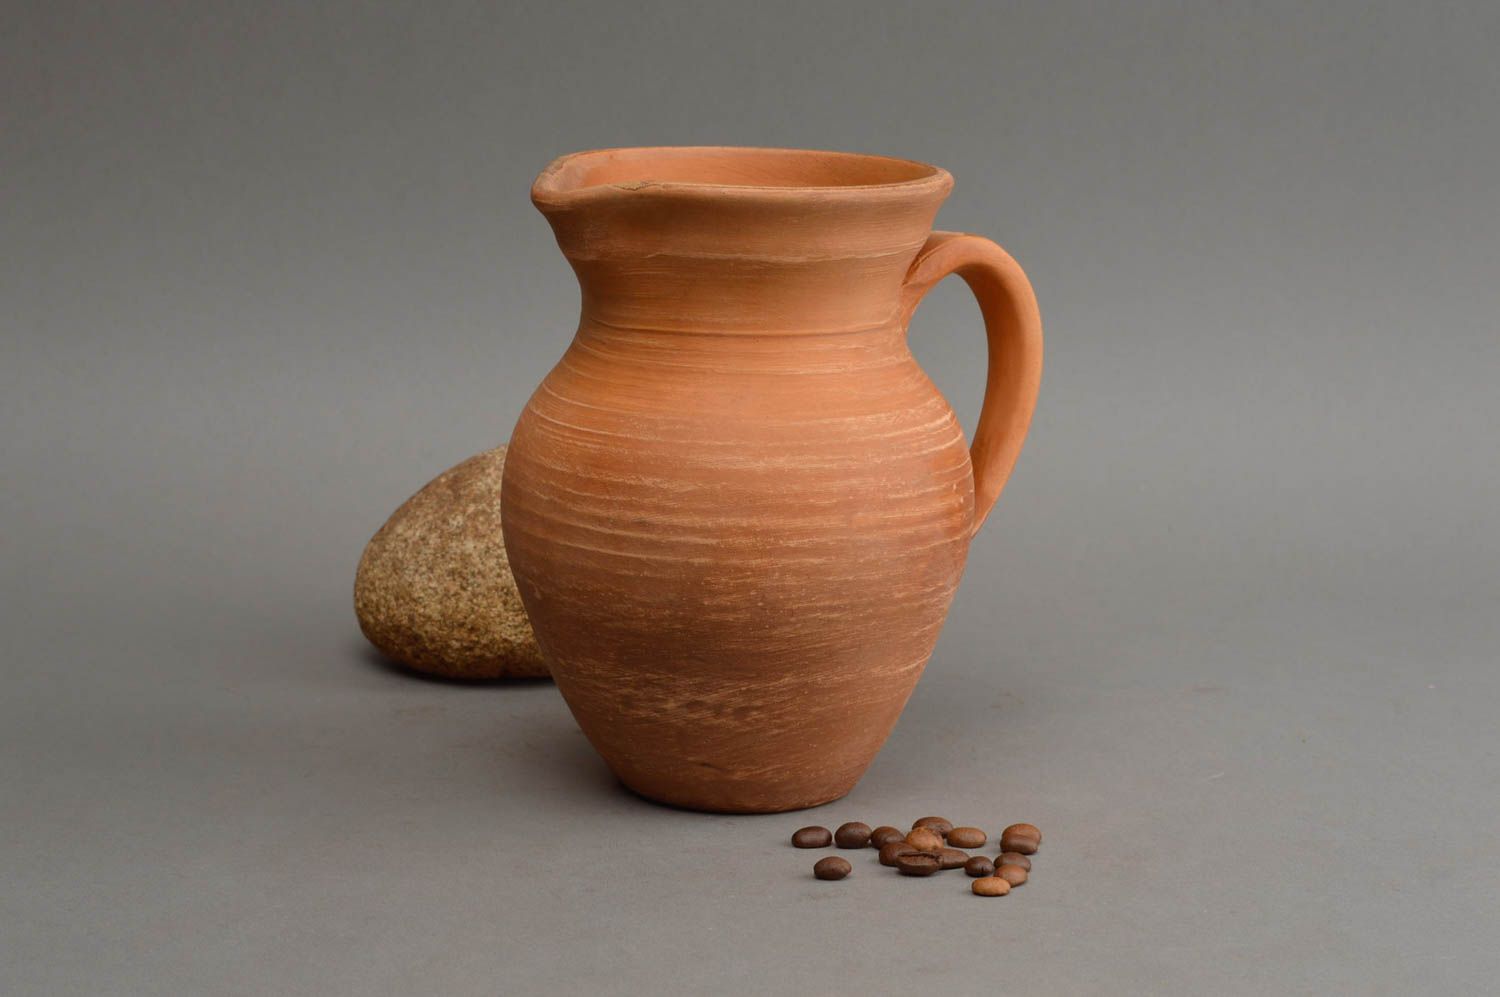 Handmade earth clay village-style water jug with handle in terracotta color 6 inches 1 lb photo 1